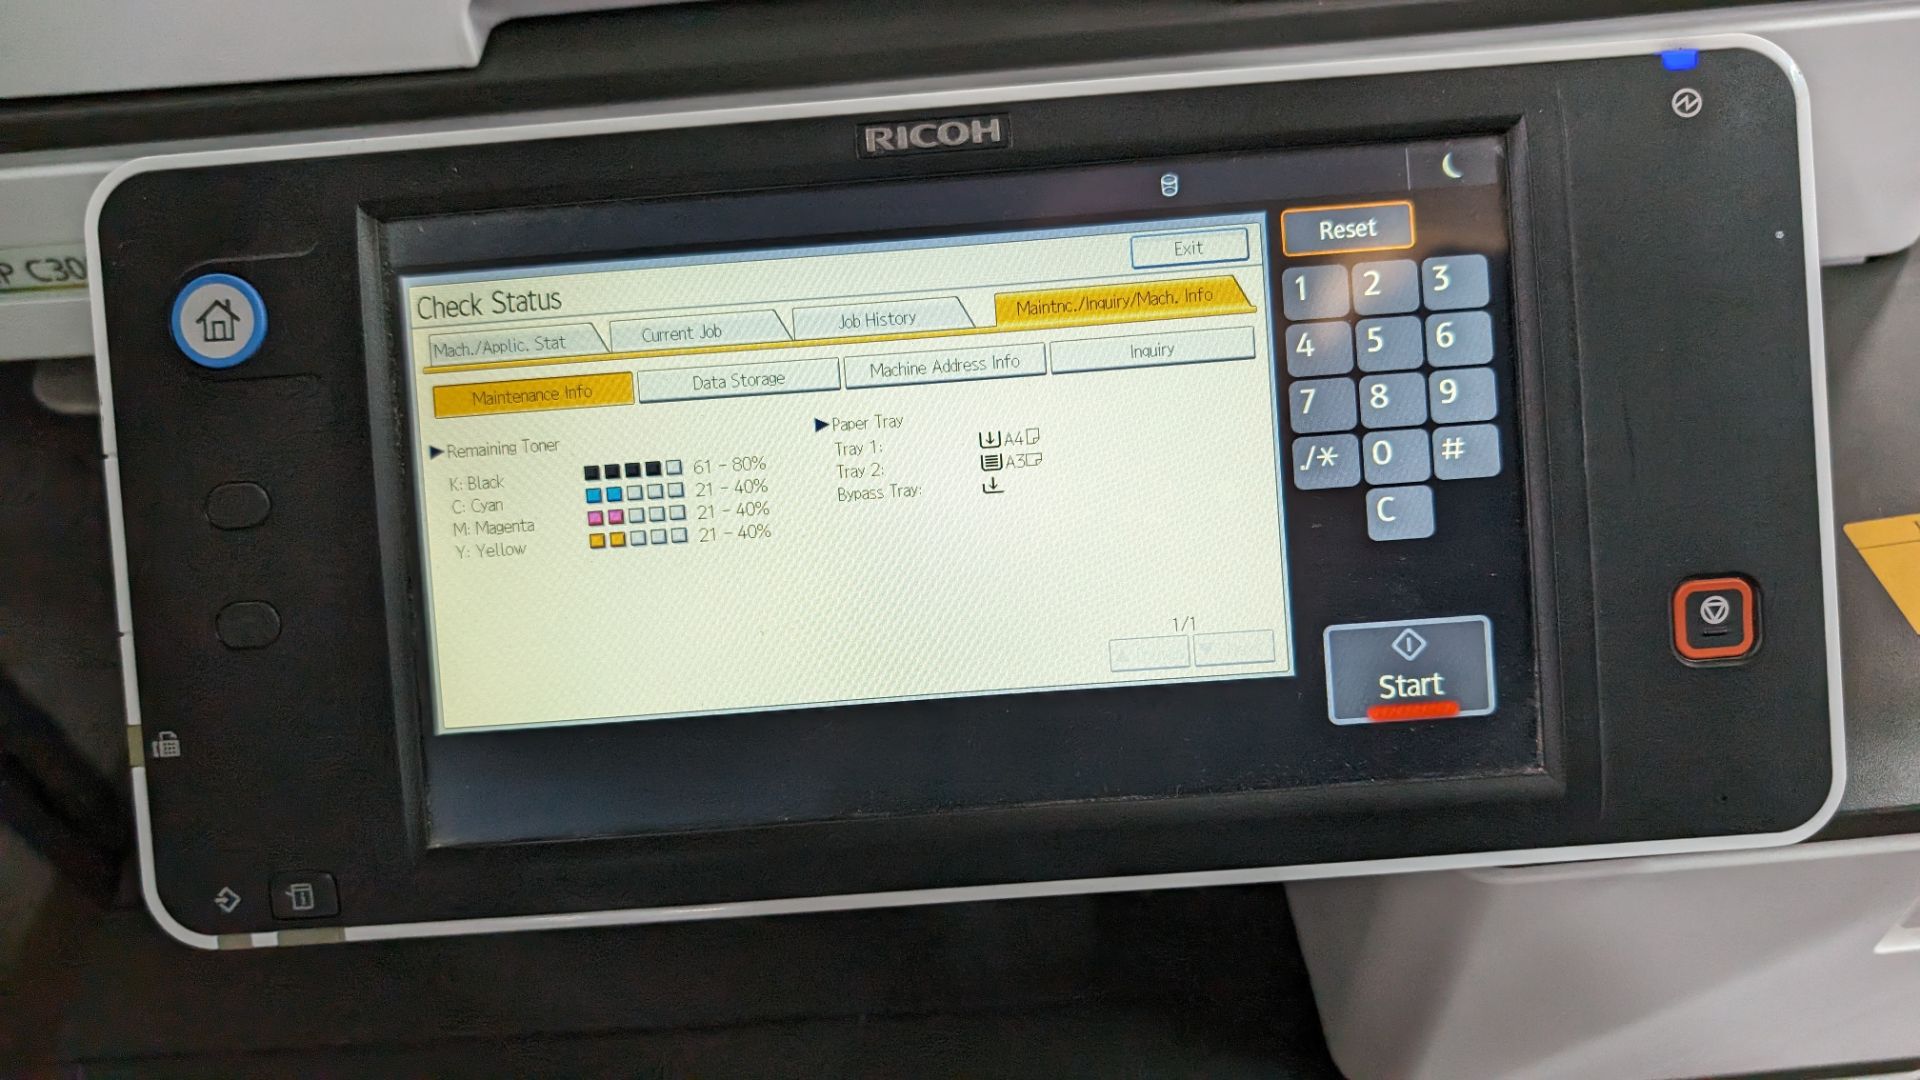 Ricoh MP C3003 floor standing copier with touchscreen controls, ADF, twin paper cassettes & more - Image 5 of 18